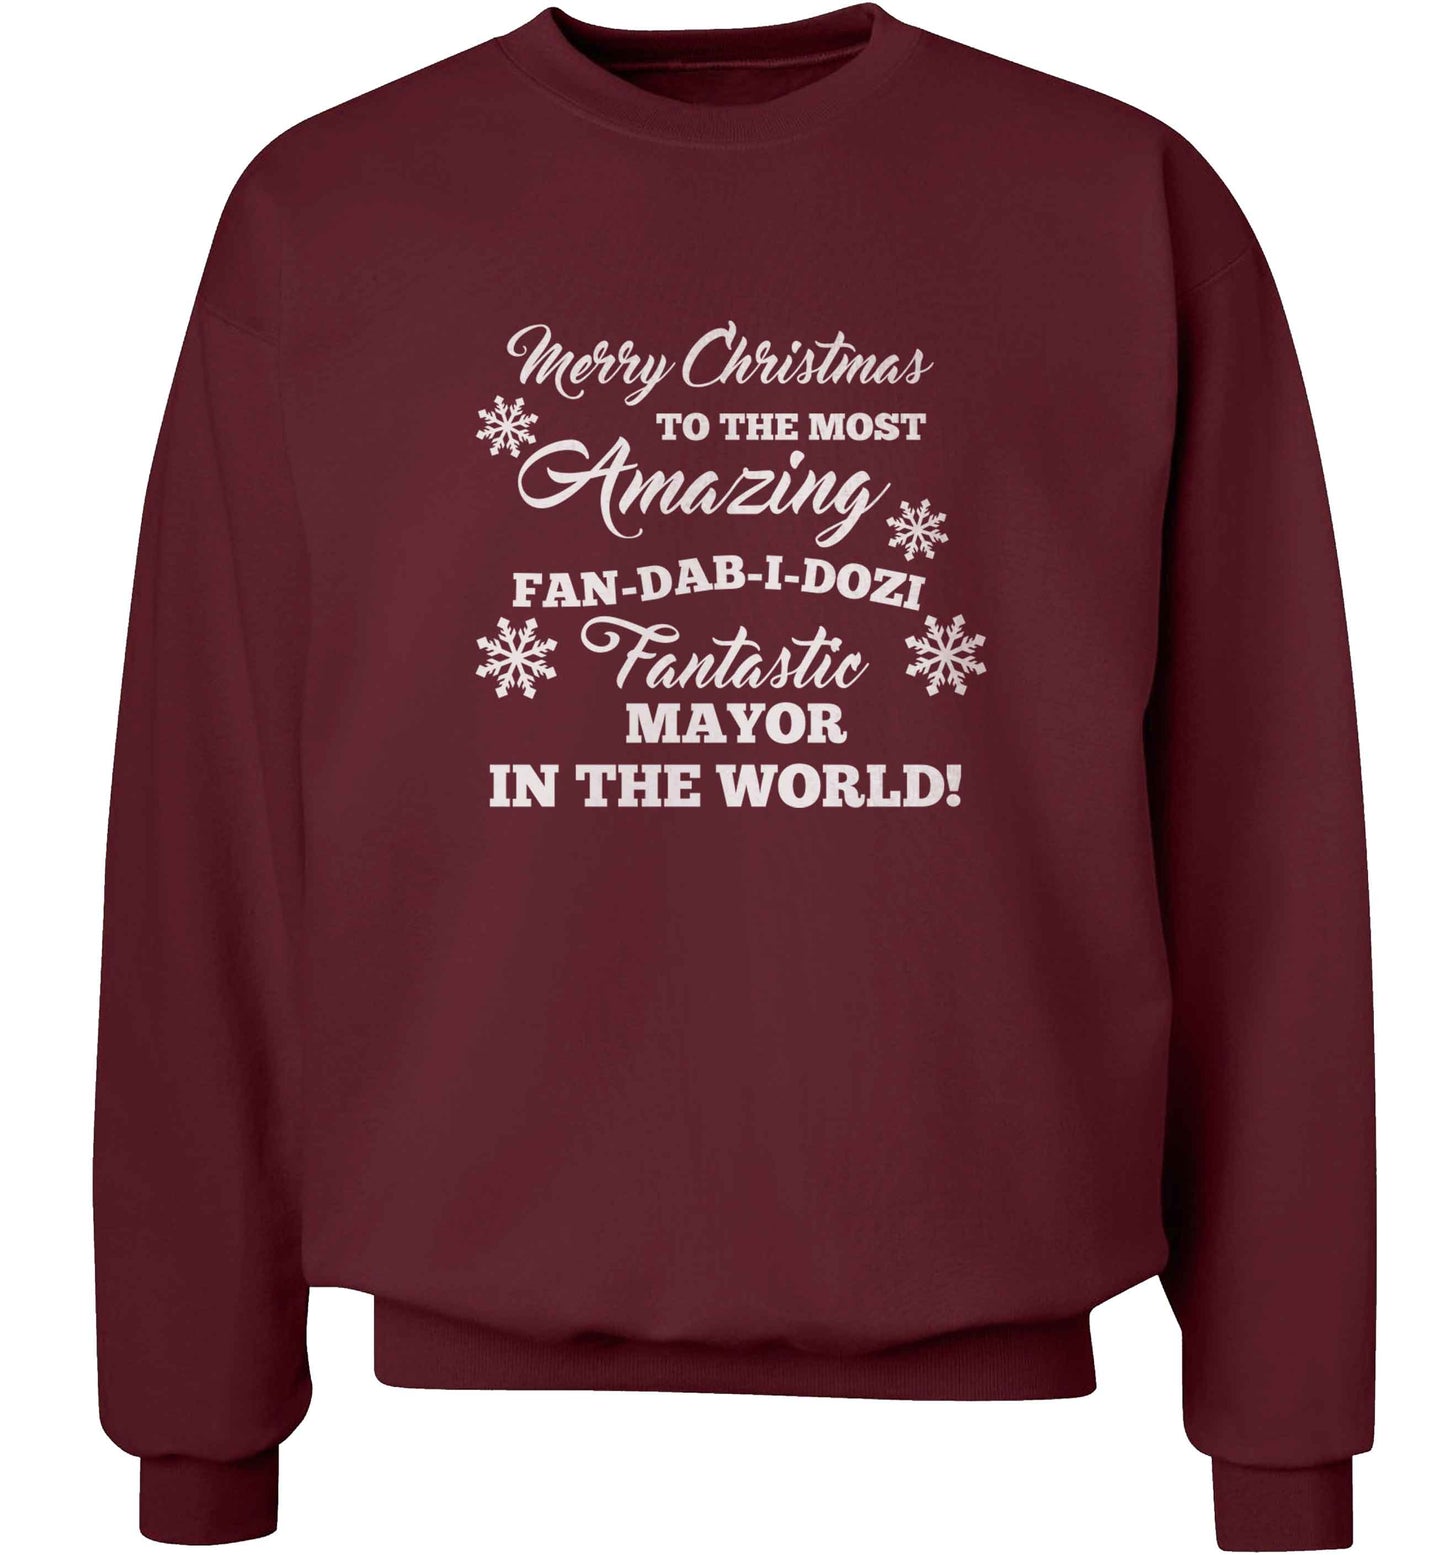 Merry Christmas to the most amazing fireman in the world! adult's unisex maroon sweater 2XL